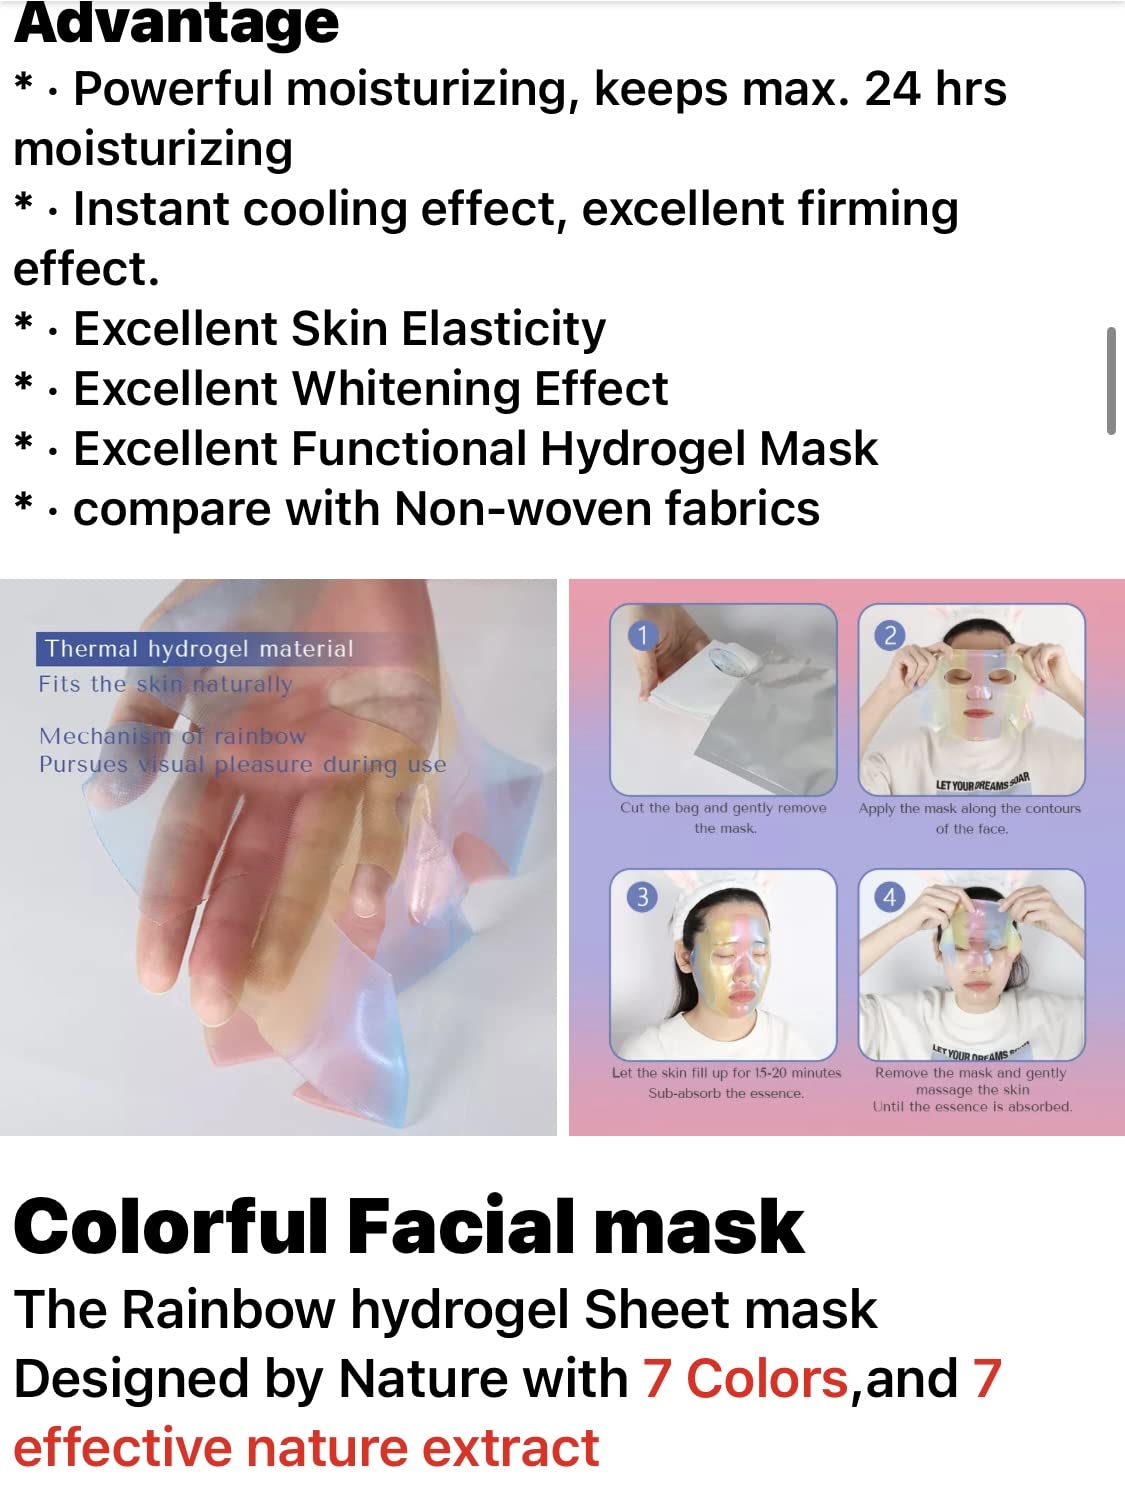 12 Combo Pack A Collagen Essence Korean Face Mask - Hydrating & Soothing Facial Mask - Hypoallergenic Self Care Sheet Mask for All Skin Types - Natural Home Spa Treatment Mask